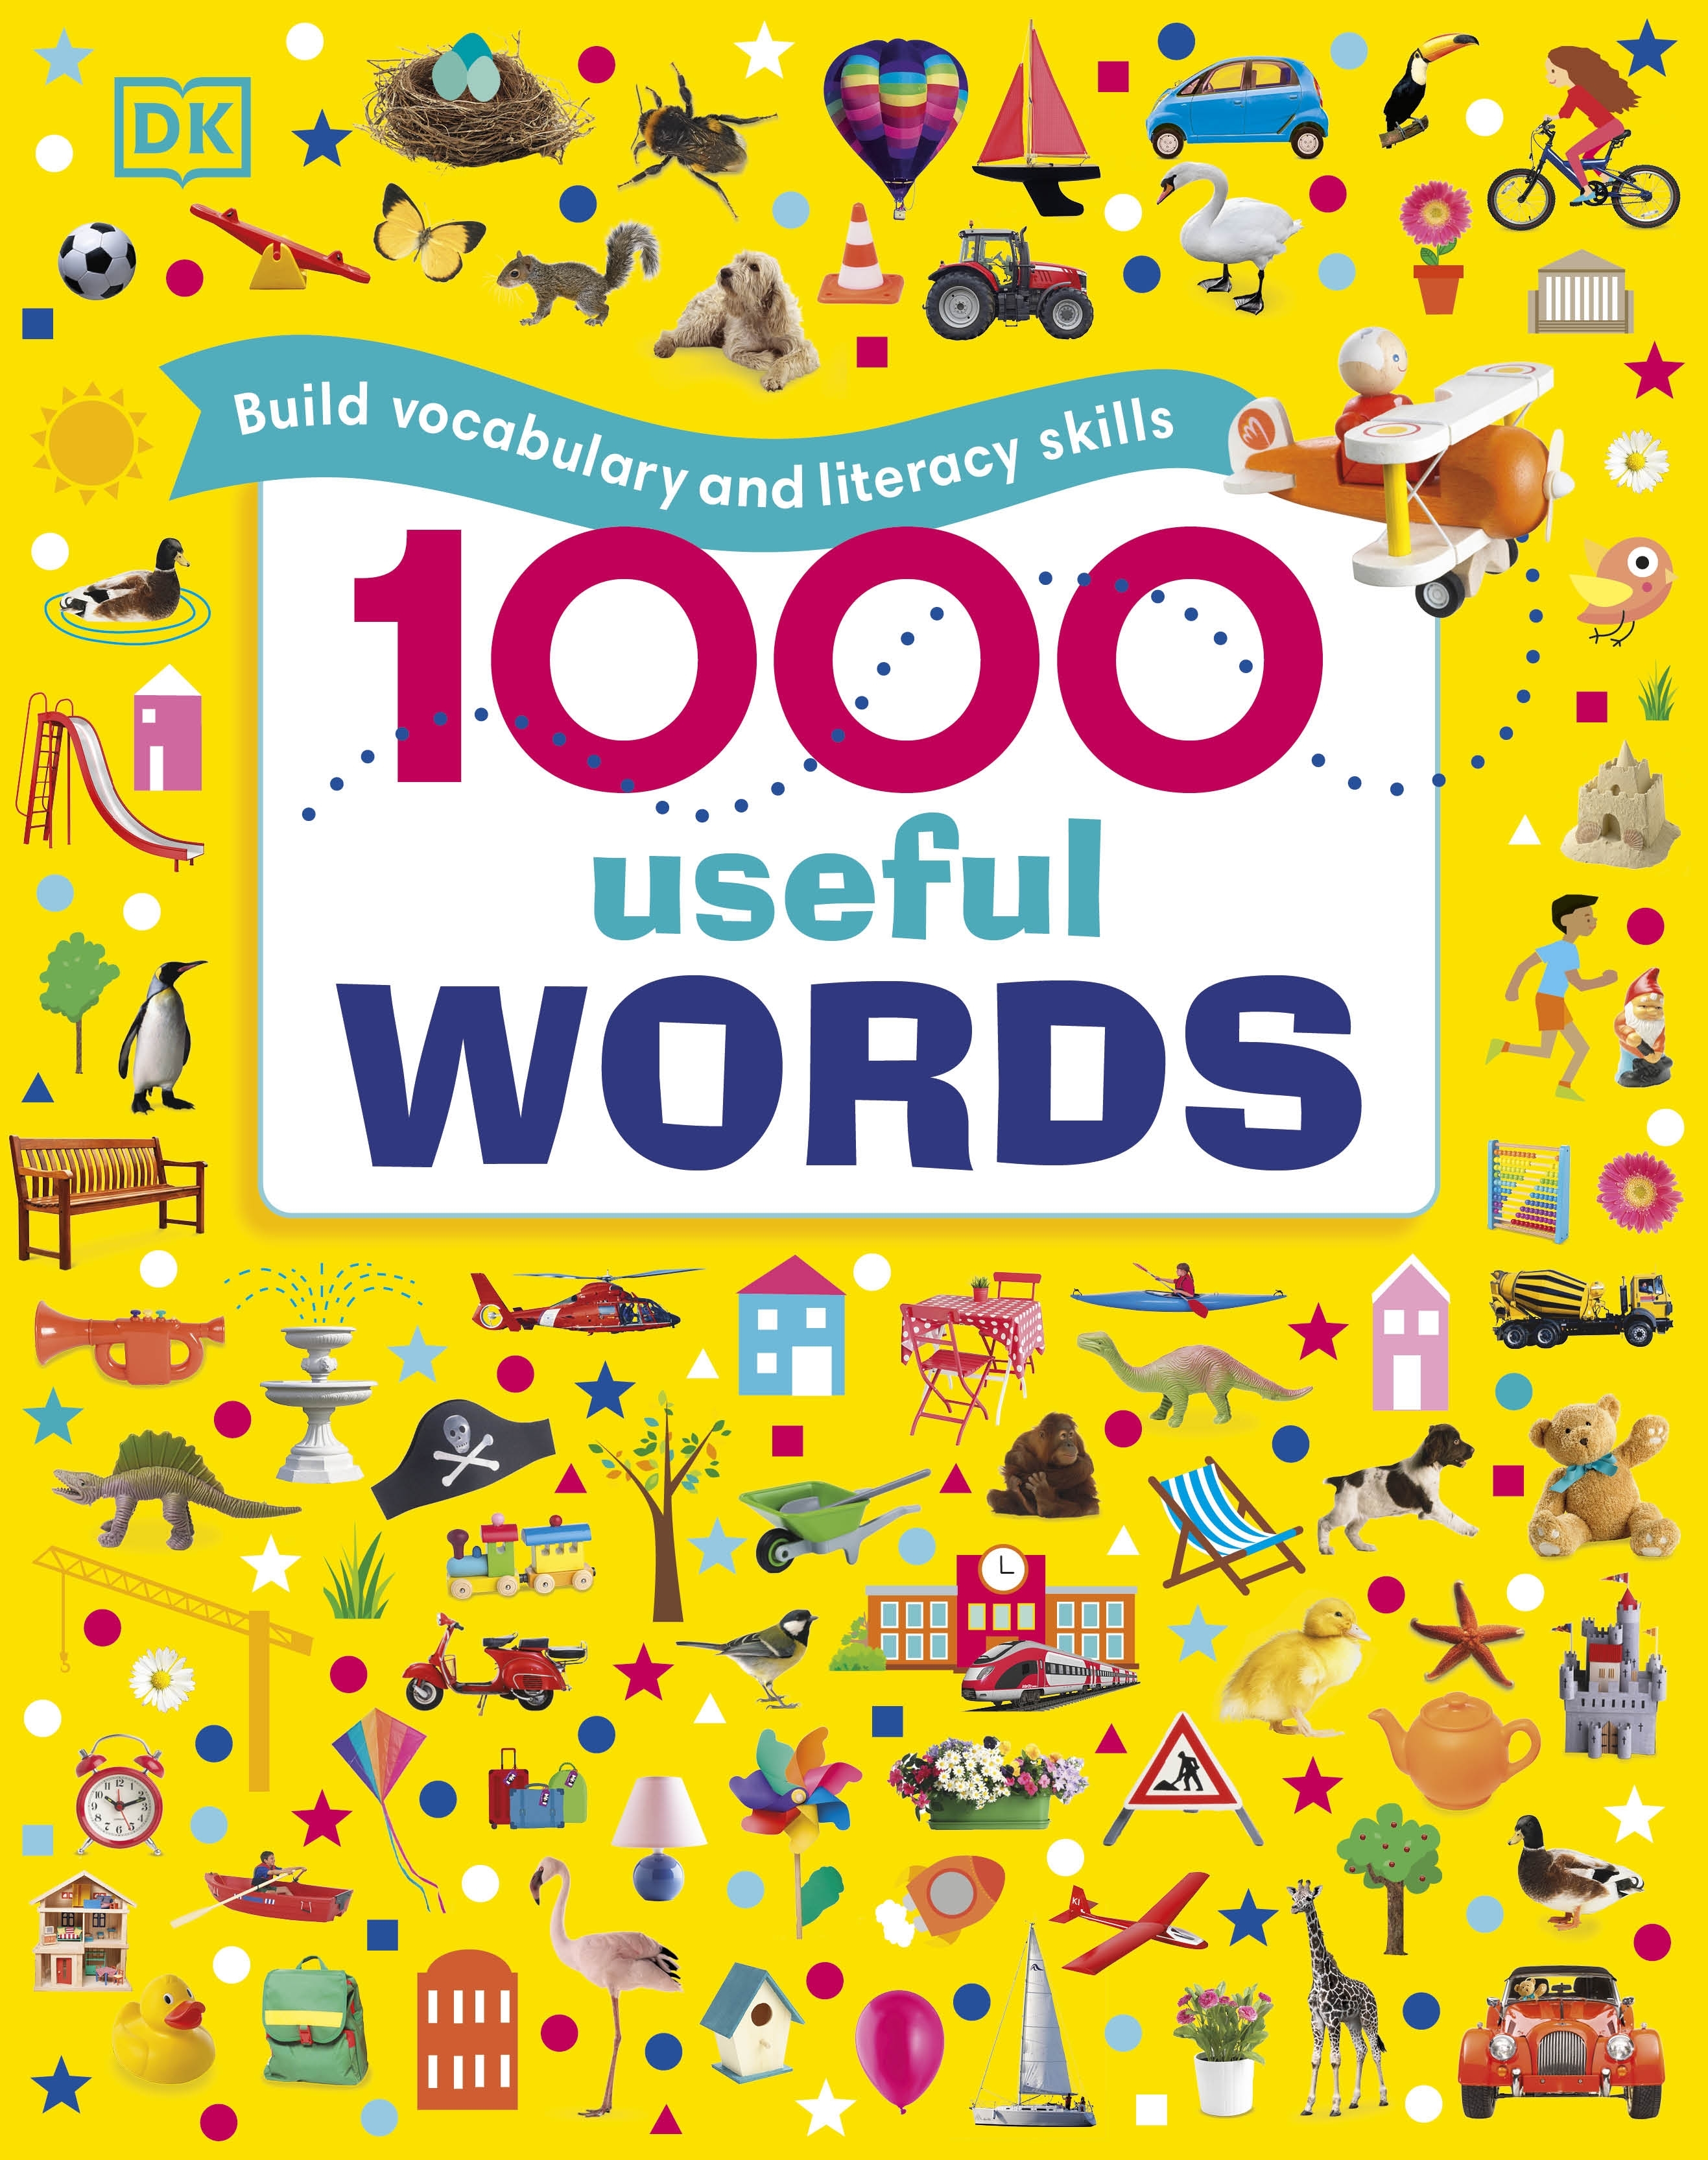 1000 Useful Words by DK - Penguin Books New Zealand